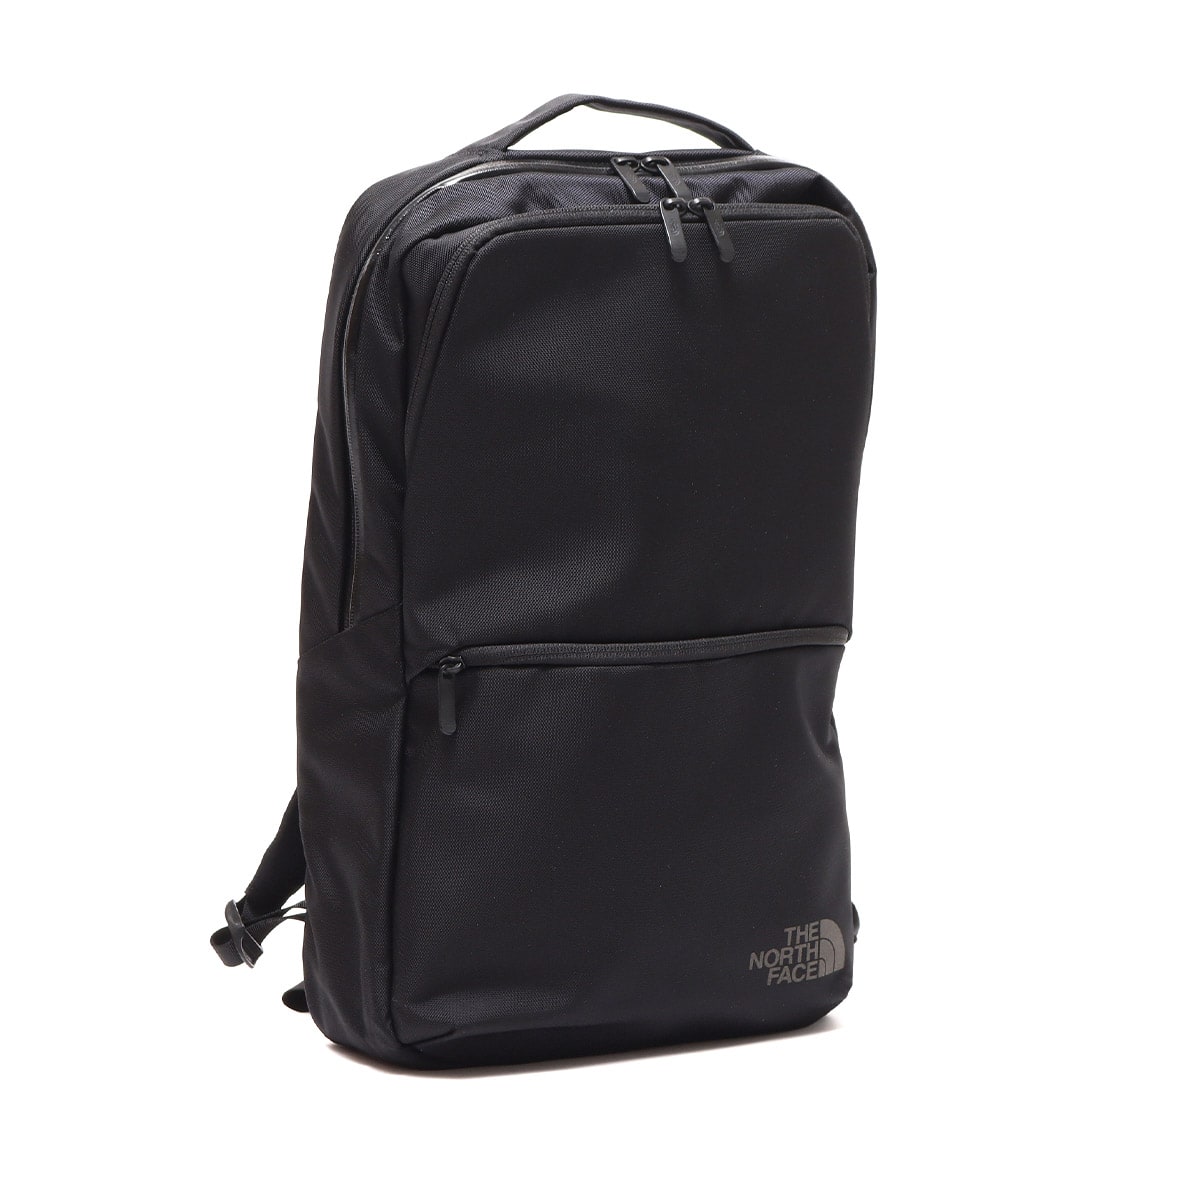 THE NORTH FACE SHUTTLE DAYPACK SLIM BLACK 23SS-I